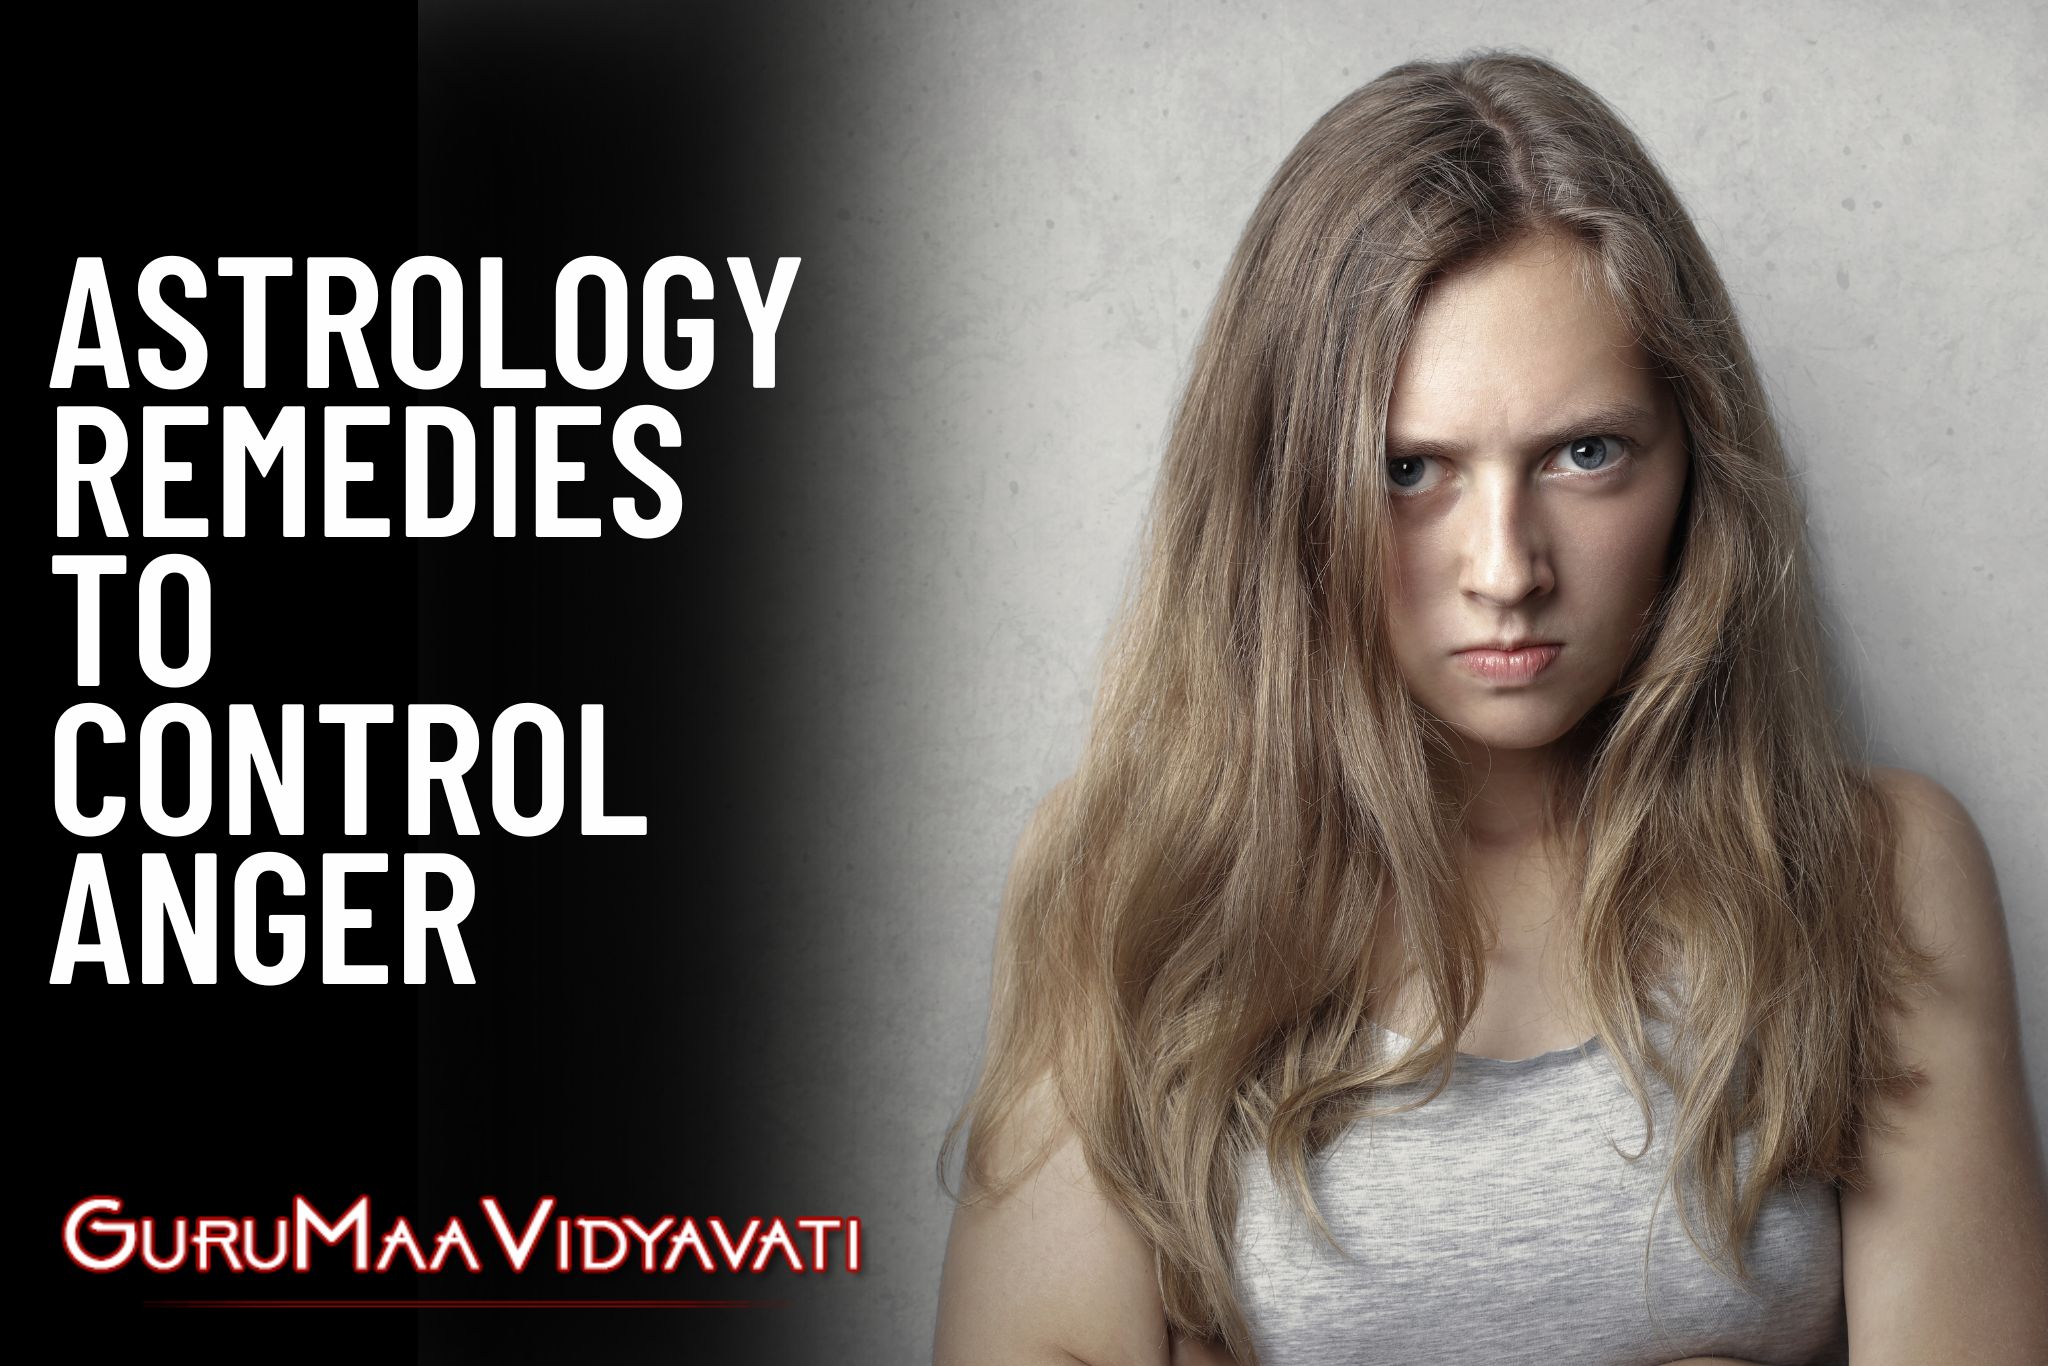 Follow these Astrological Remedies to Control Anger